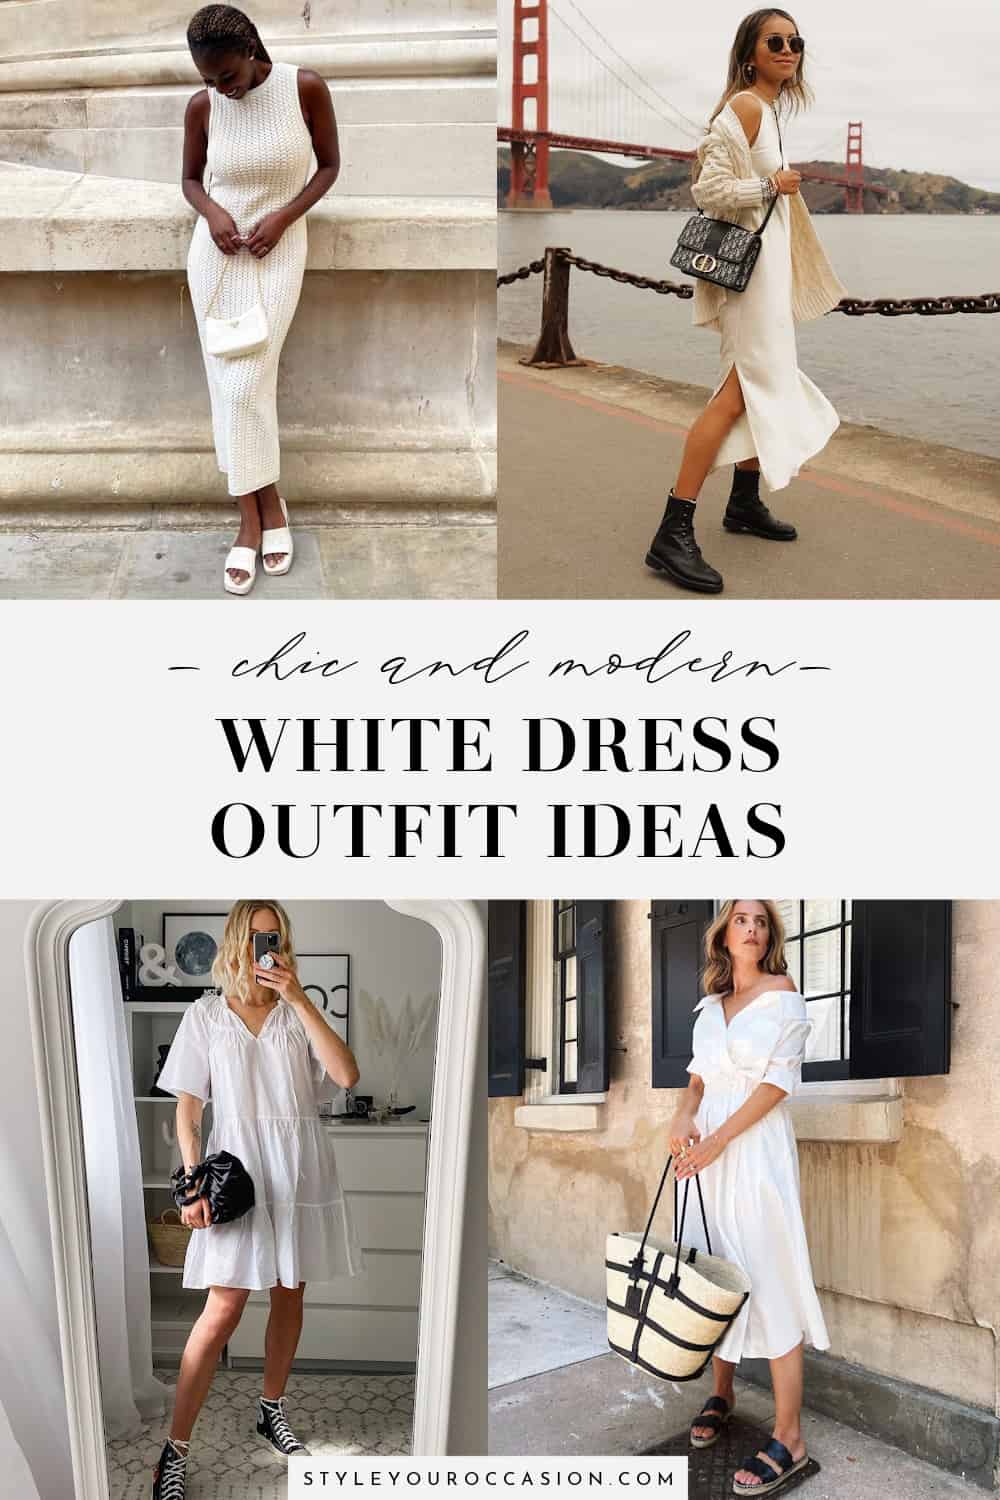 The Best Shoes To Wear With A White Dress + Chic Looks To Steal